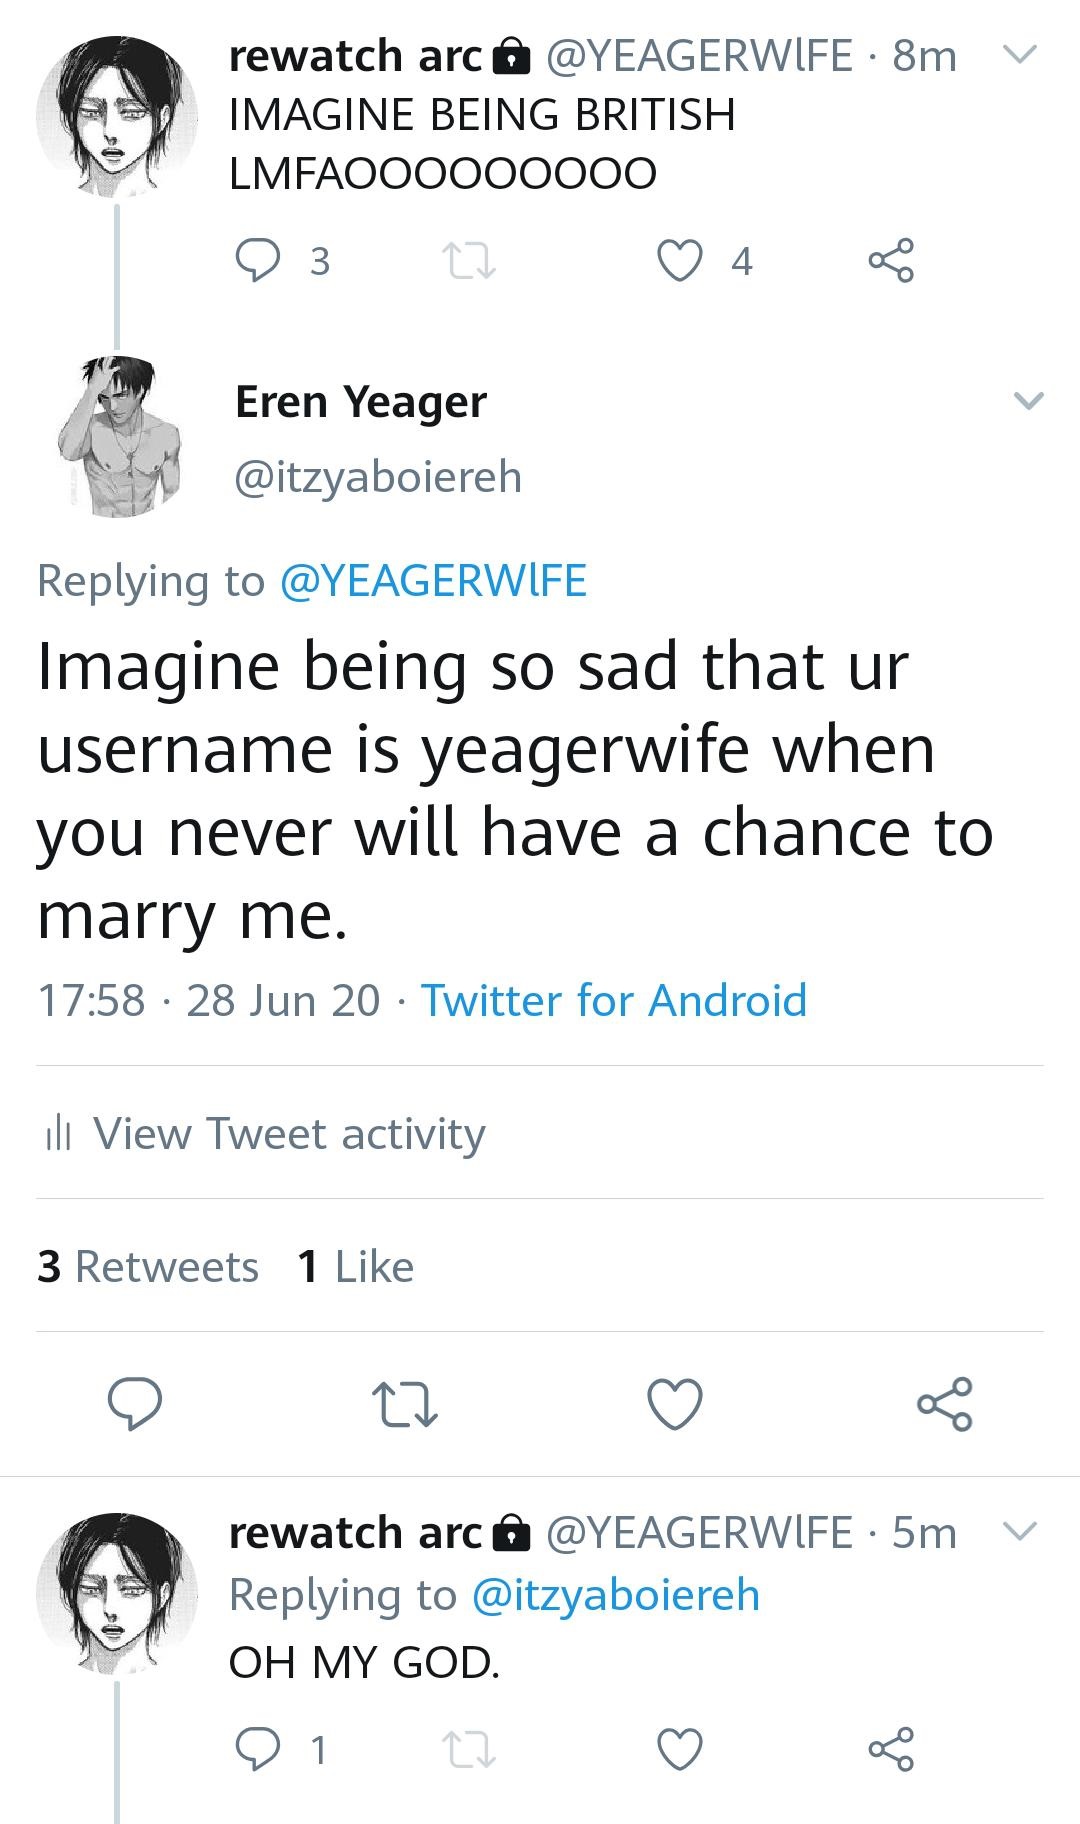 body jewelry - rewatch arc 8m Imagine Being British LMFAOOO000000 3 22 4. Eren Yeager Imagine being so sad that ur username is yeagerwife when you never will have a chance to marry me. 28 Jun 20 Twitter for Android ili View Tweet activity 3 1 22 rewatch a